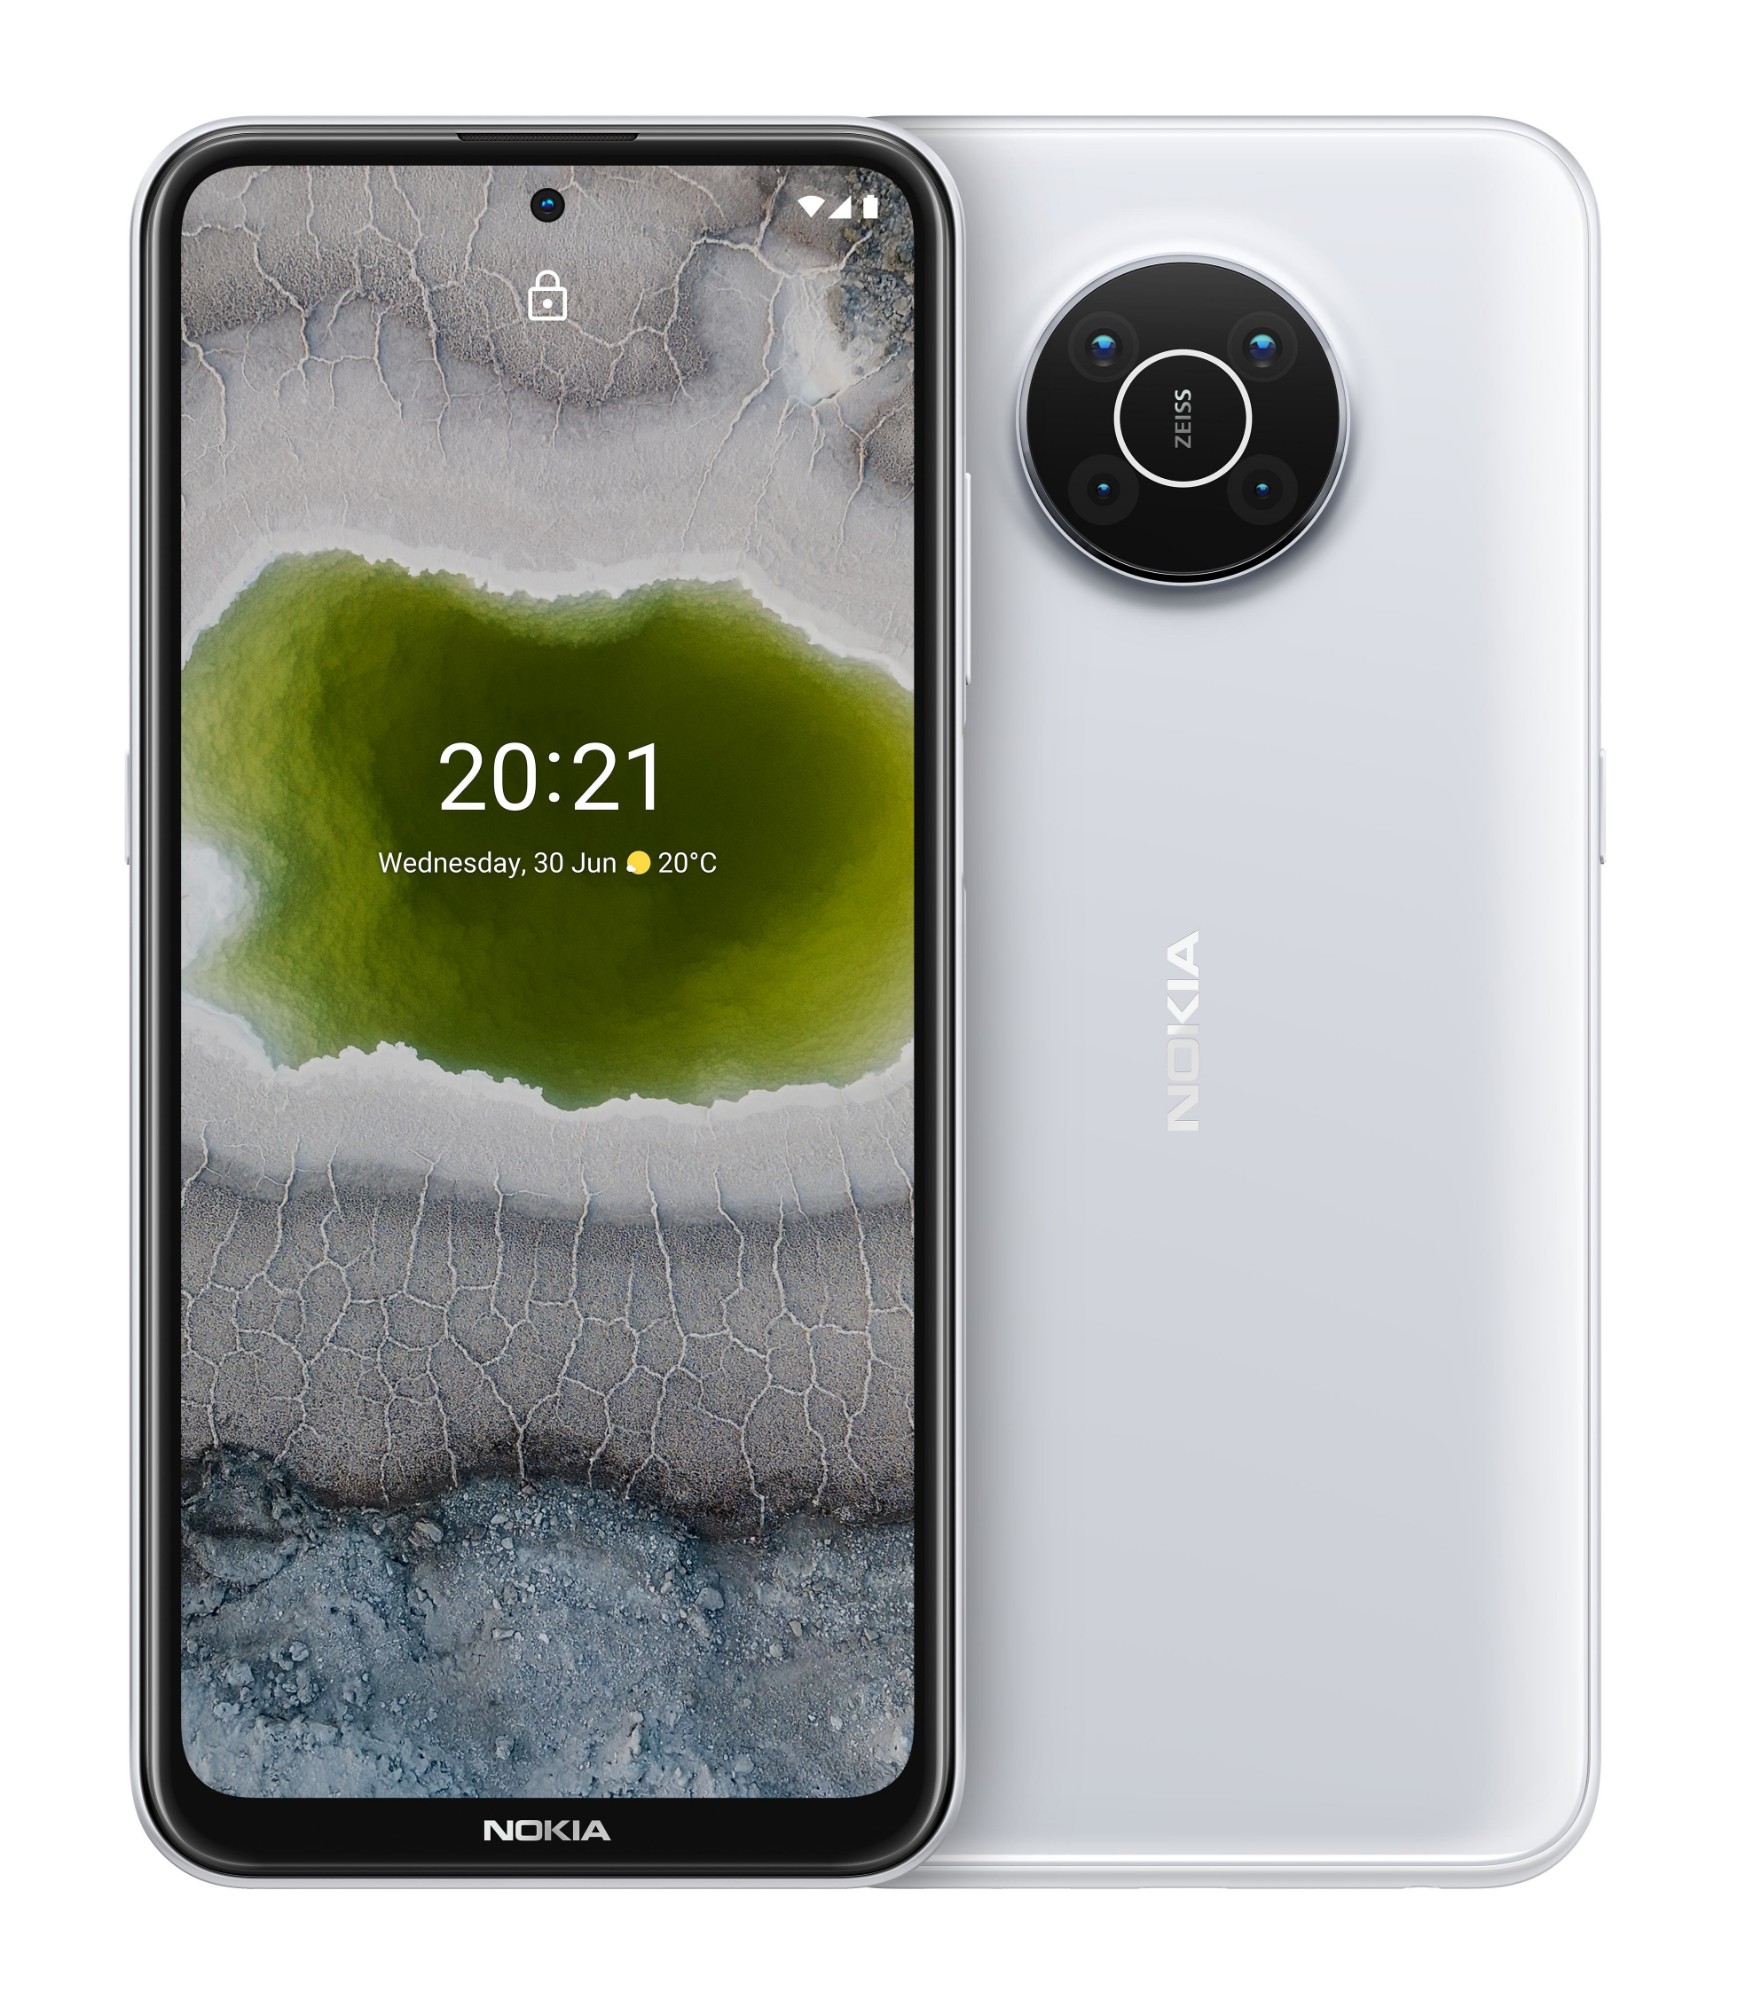 Nokia X10 6.67 Inch Android UK SIM Free Smartphone with 5G Connectivity - 6 GB RAM and 64 GB Storage (Dual SIM) - Snow White